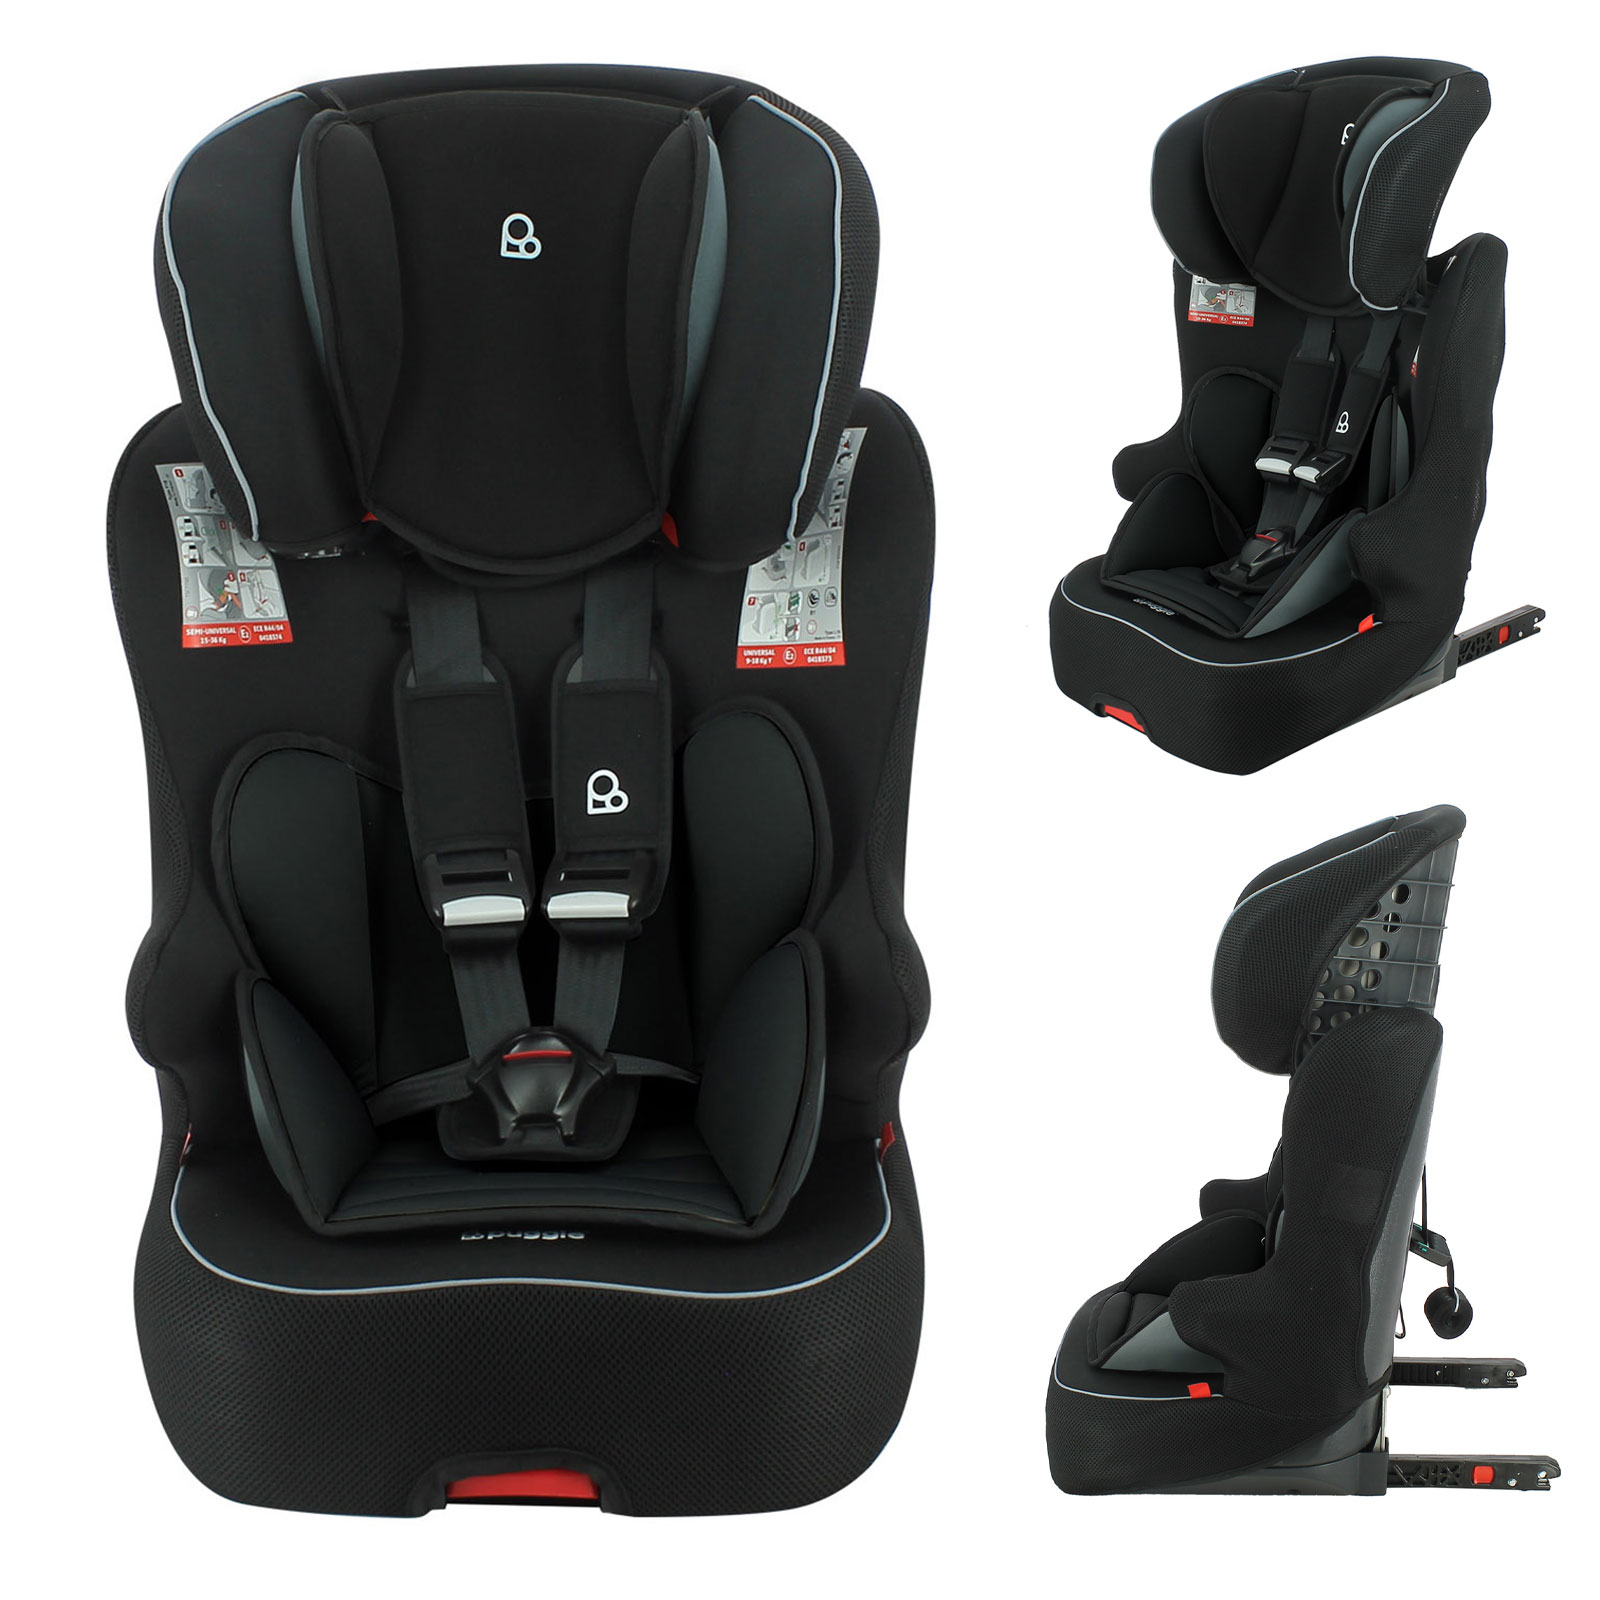 Puggle Kingston Comfort Plus Luxe ISOFIX Group 1/2/3 Car Seat - Storm Black (9 Months-12 Years)